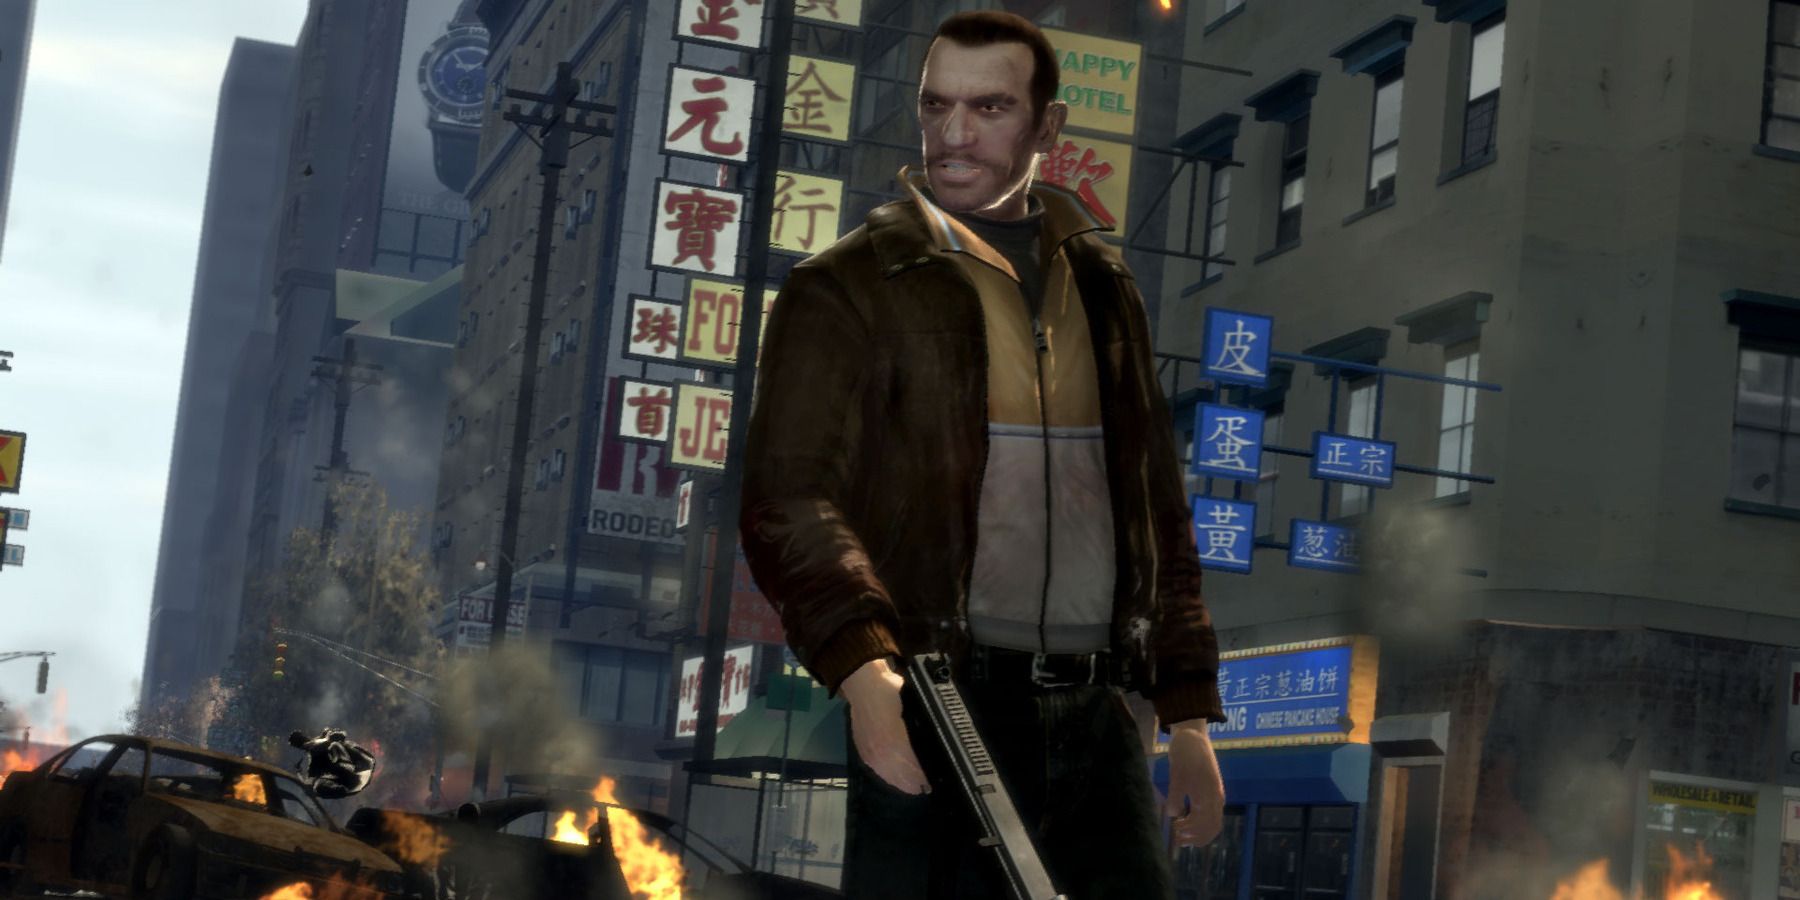 Open IV's Liberty City GTA V mod has been cancelled